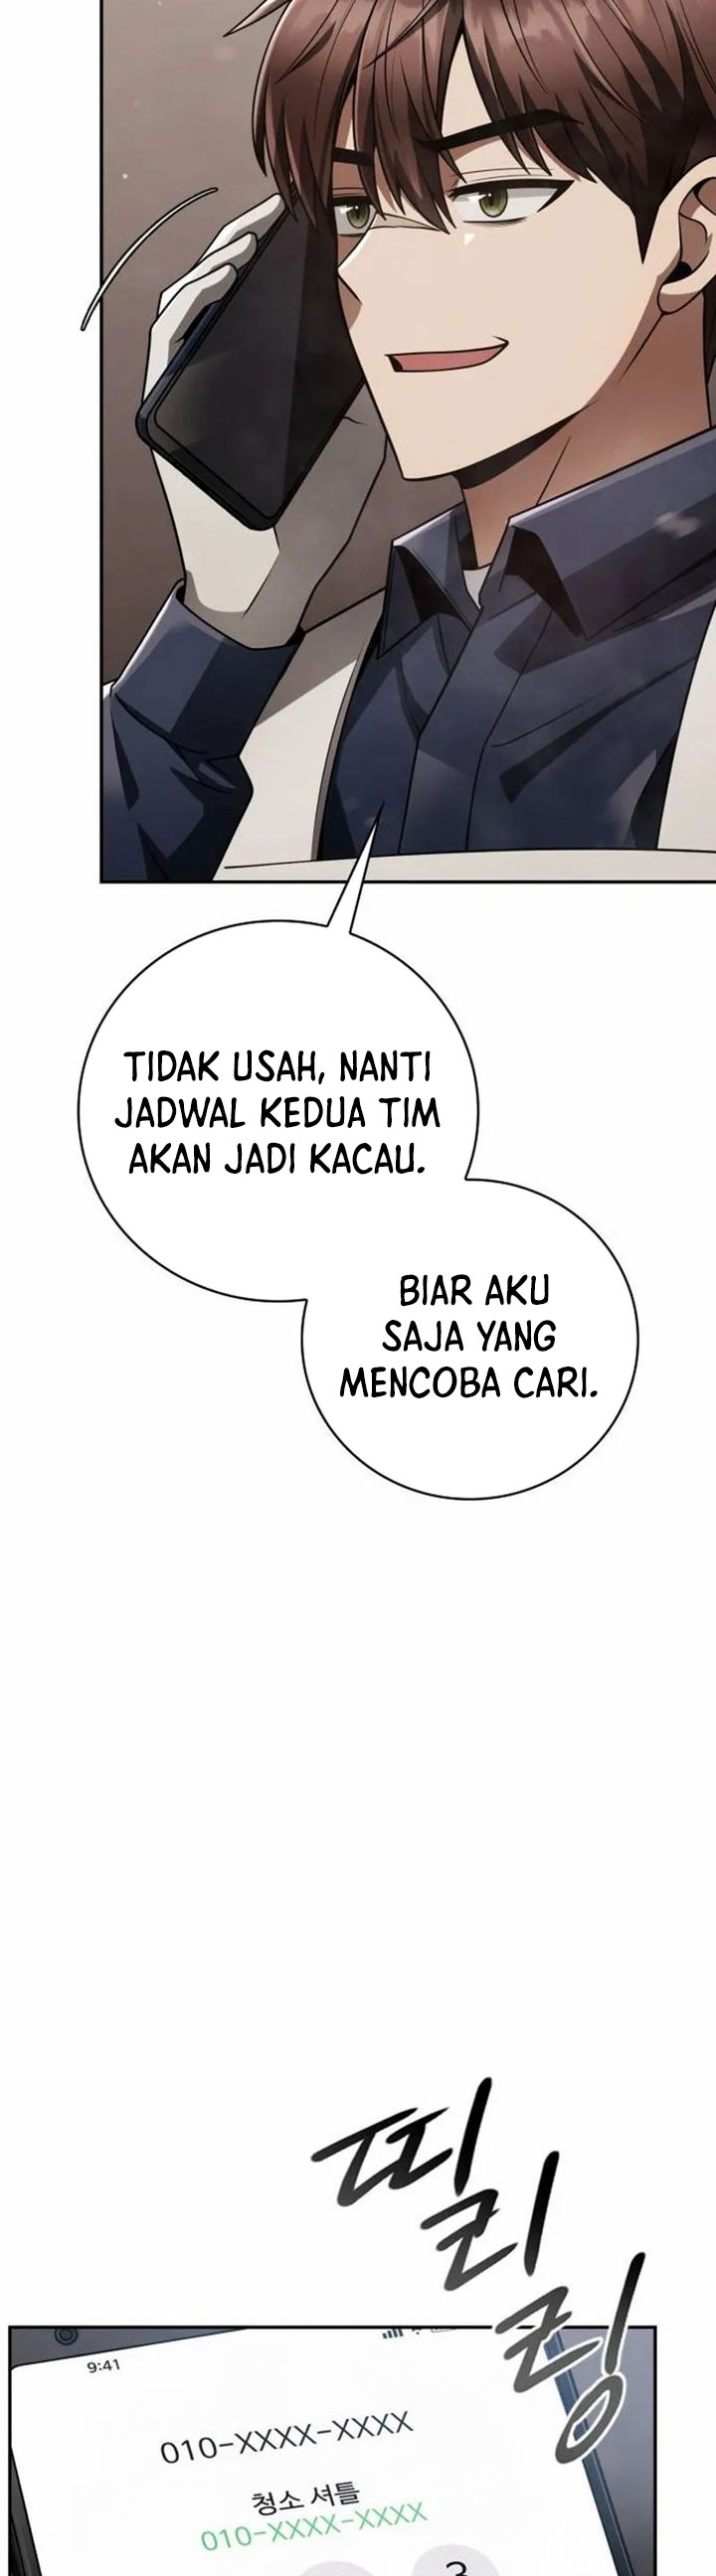 Dilarang COPAS - situs resmi www.mangacanblog.com - Komik clever cleaning life of the returned genius hunter 032 - chapter 32 33 Indonesia clever cleaning life of the returned genius hunter 032 - chapter 32 Terbaru 49|Baca Manga Komik Indonesia|Mangacan